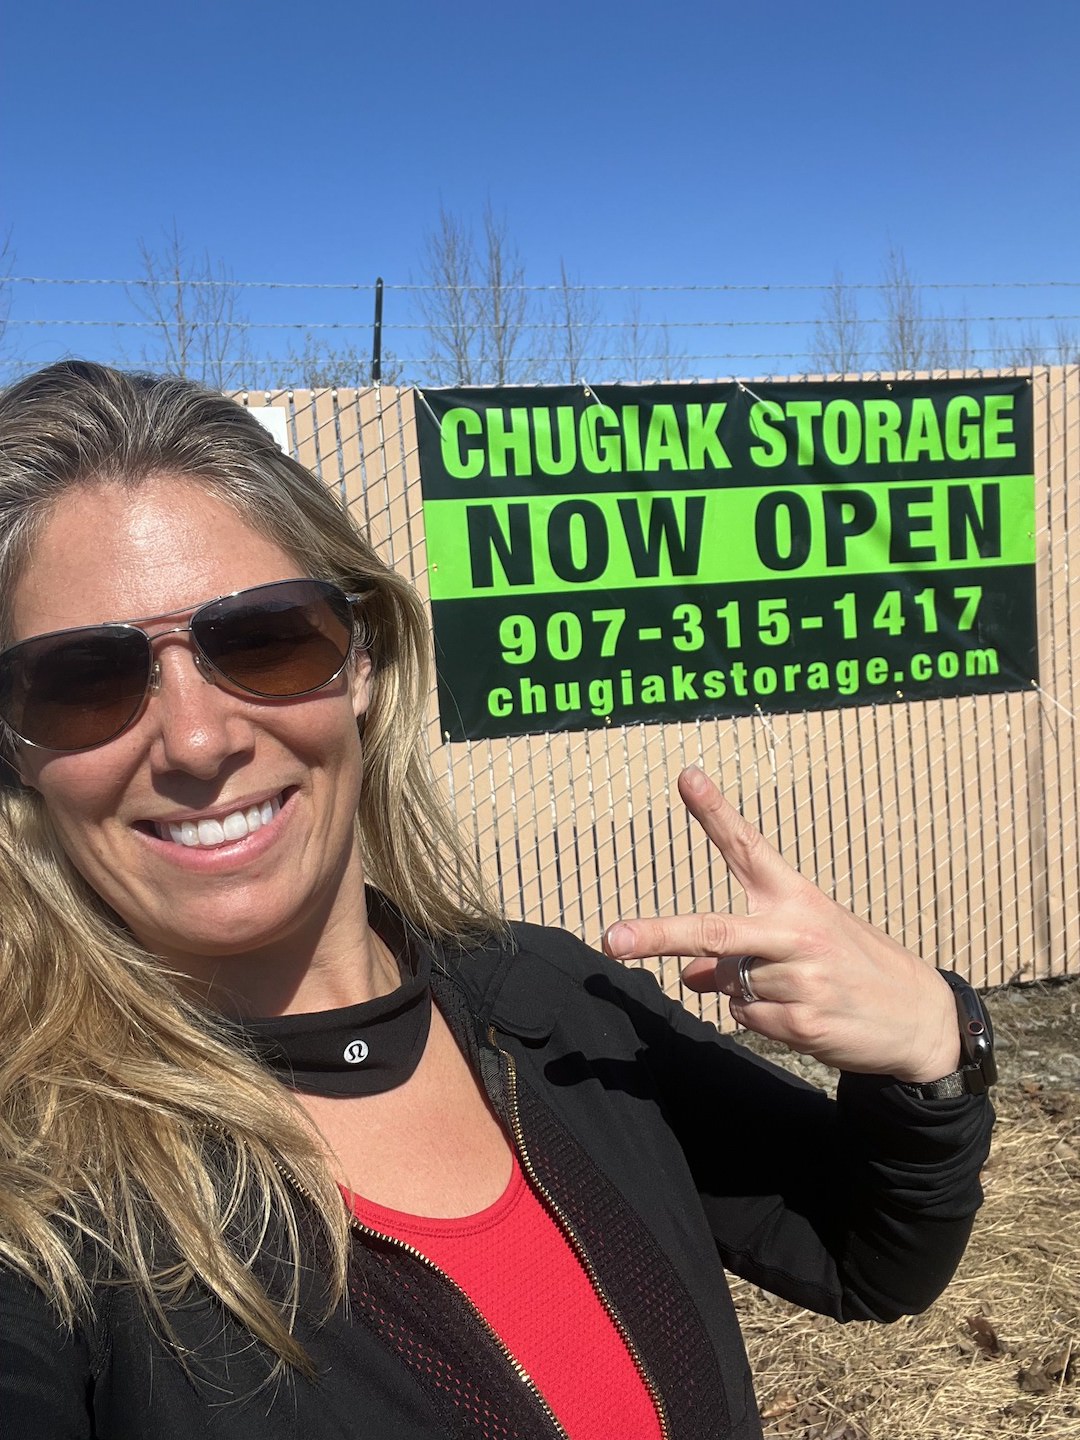 Self-Storage Facility near Eagle River has Online Booking with 24/7 access